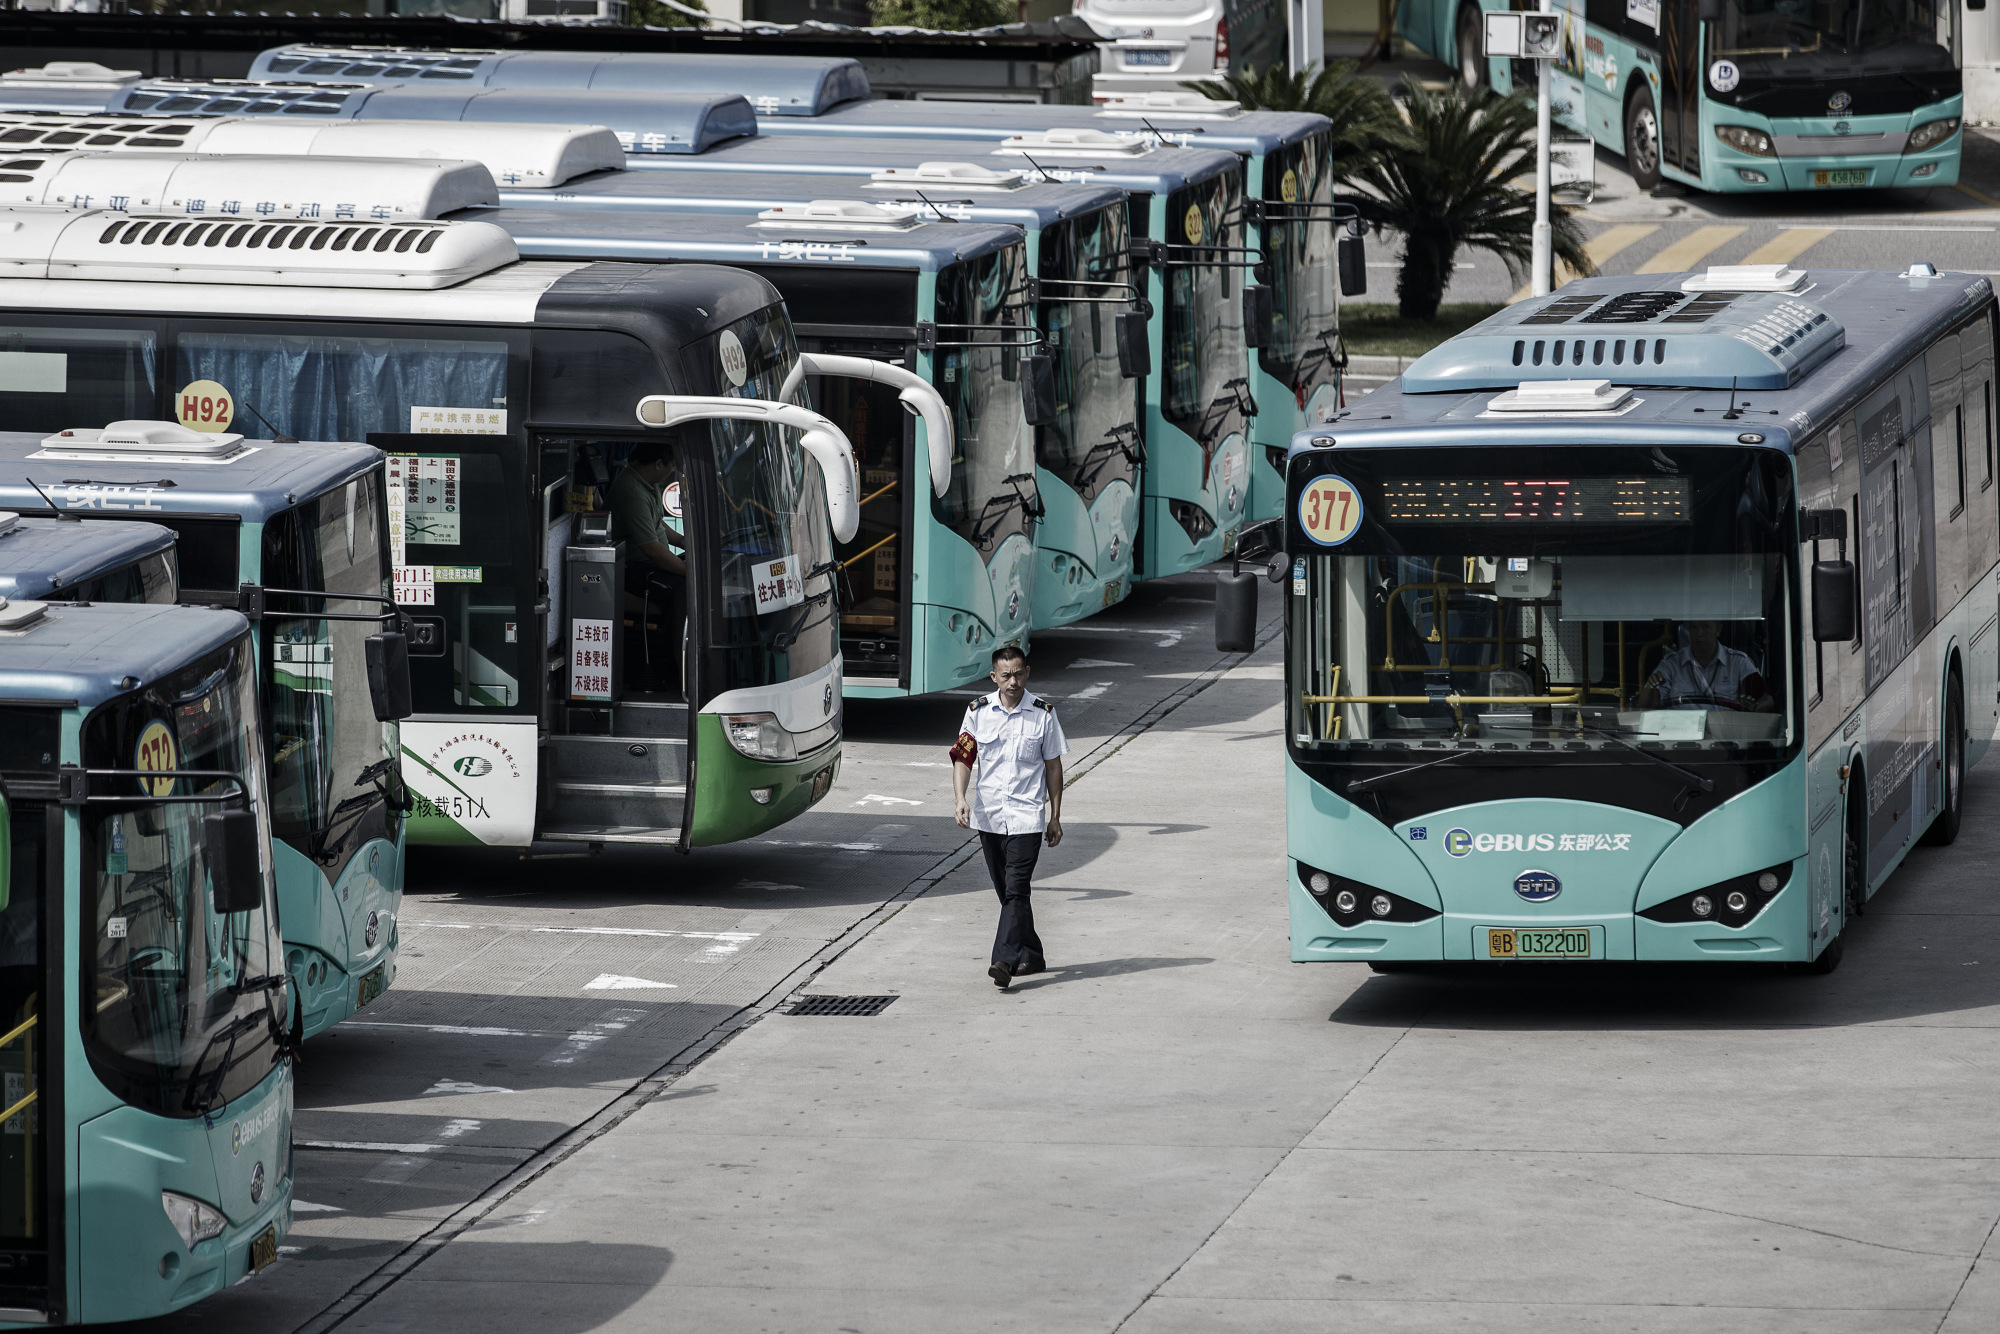 BYD electric buses at a public transportation hub in Shenzhen, China.